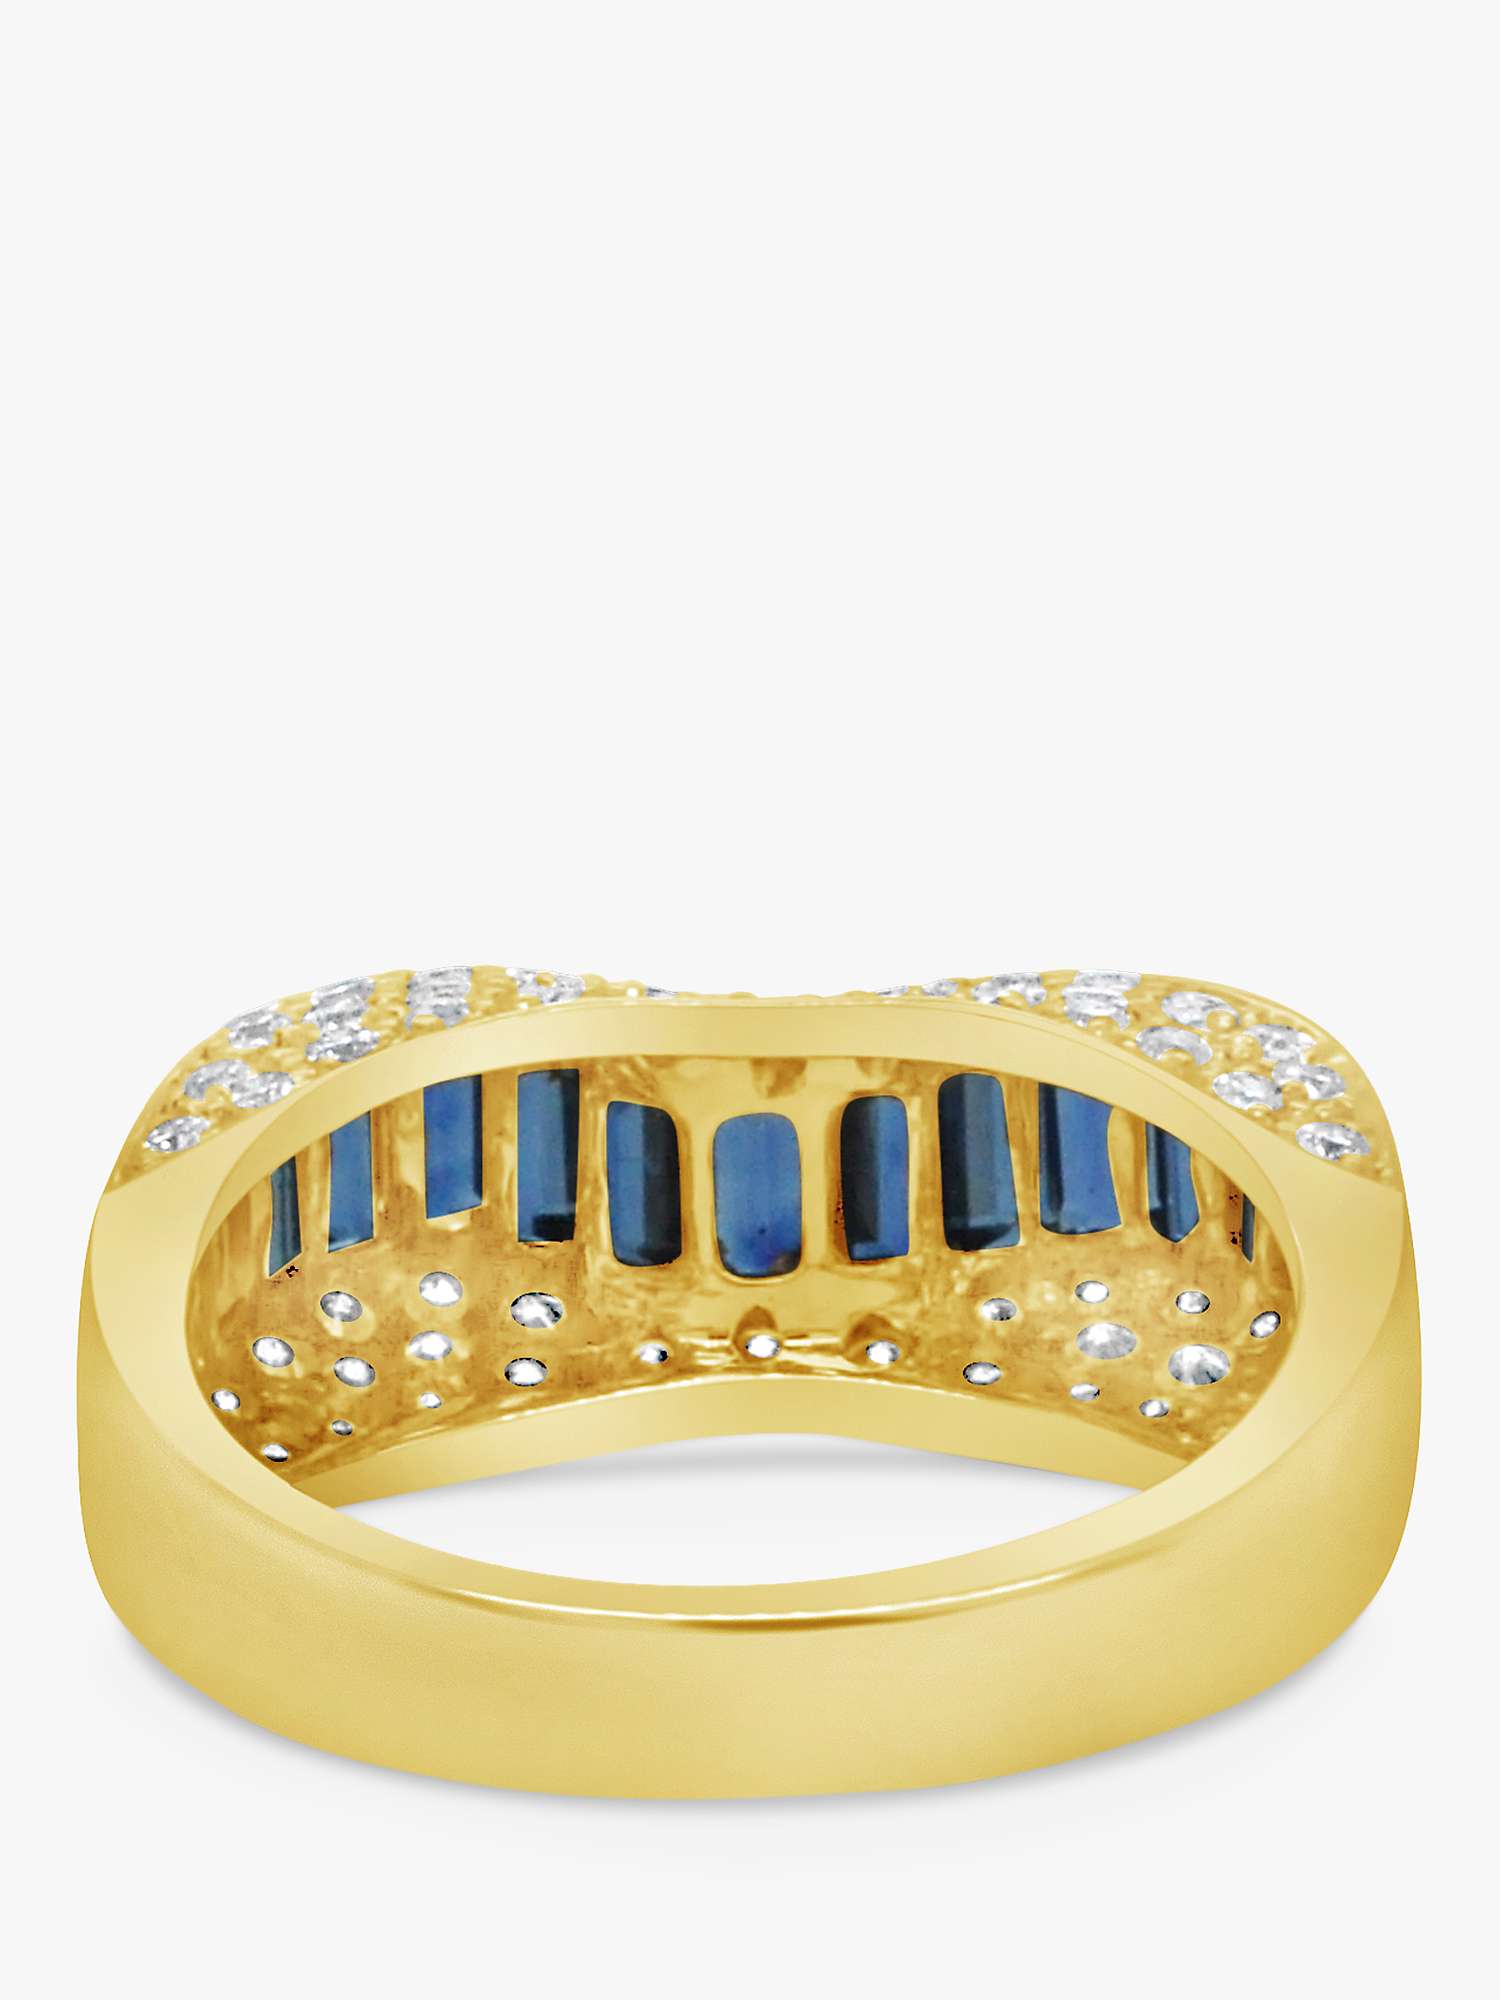 Buy Milton & Humble Jewellery Second Hand 18ct Yellow Gold Undulating Sapphire & Diamond Cocktail Ring Online at johnlewis.com